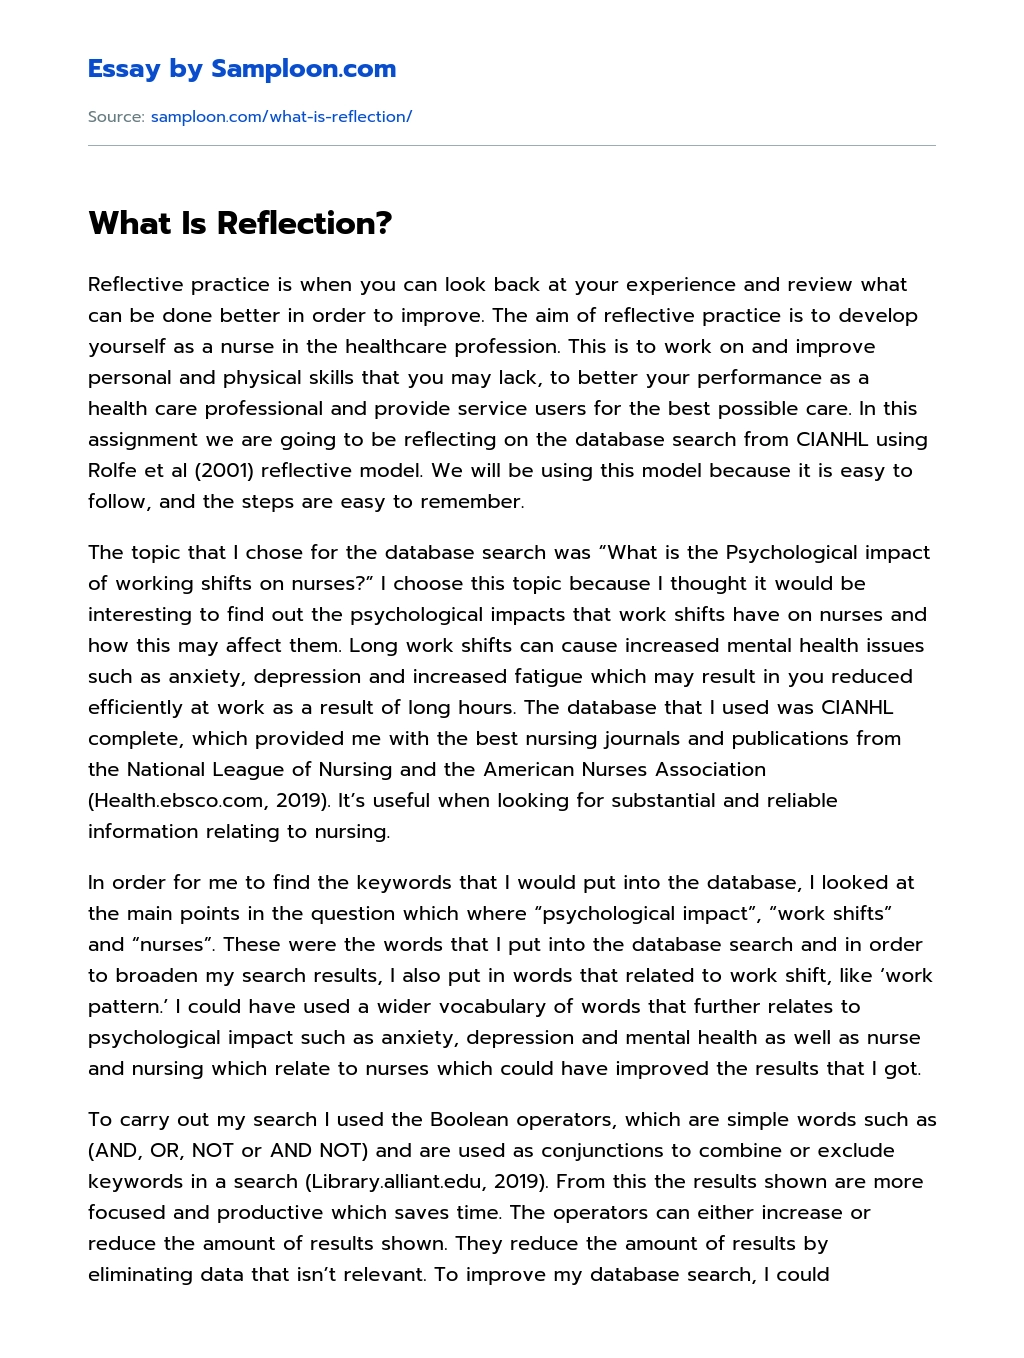 What Is Reflection? essay